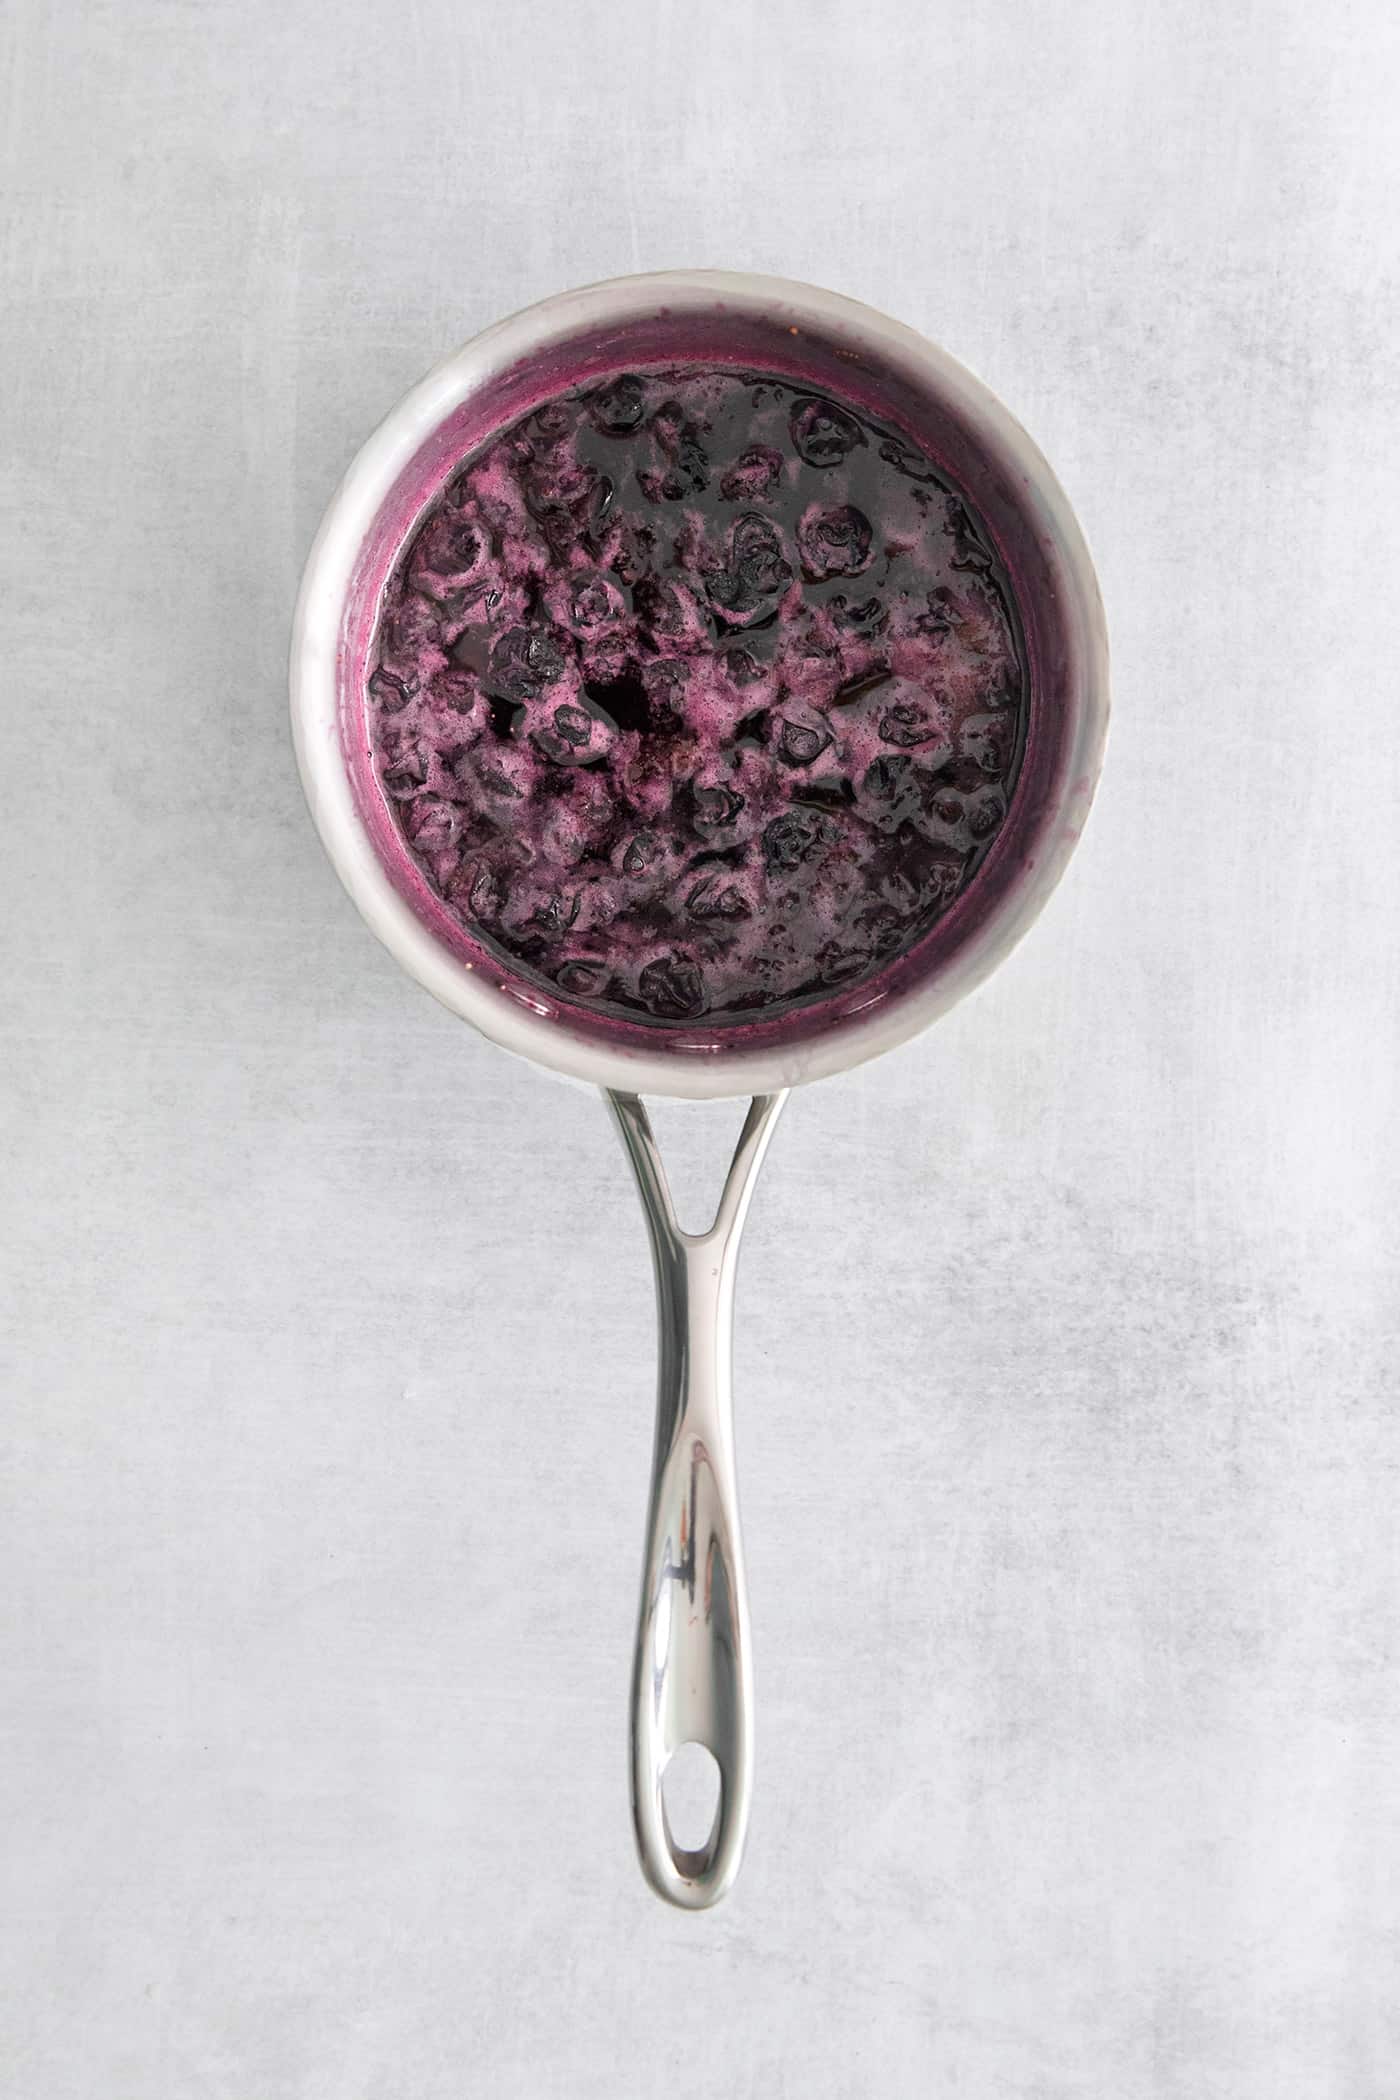 Blueberry simple syrup in a pan